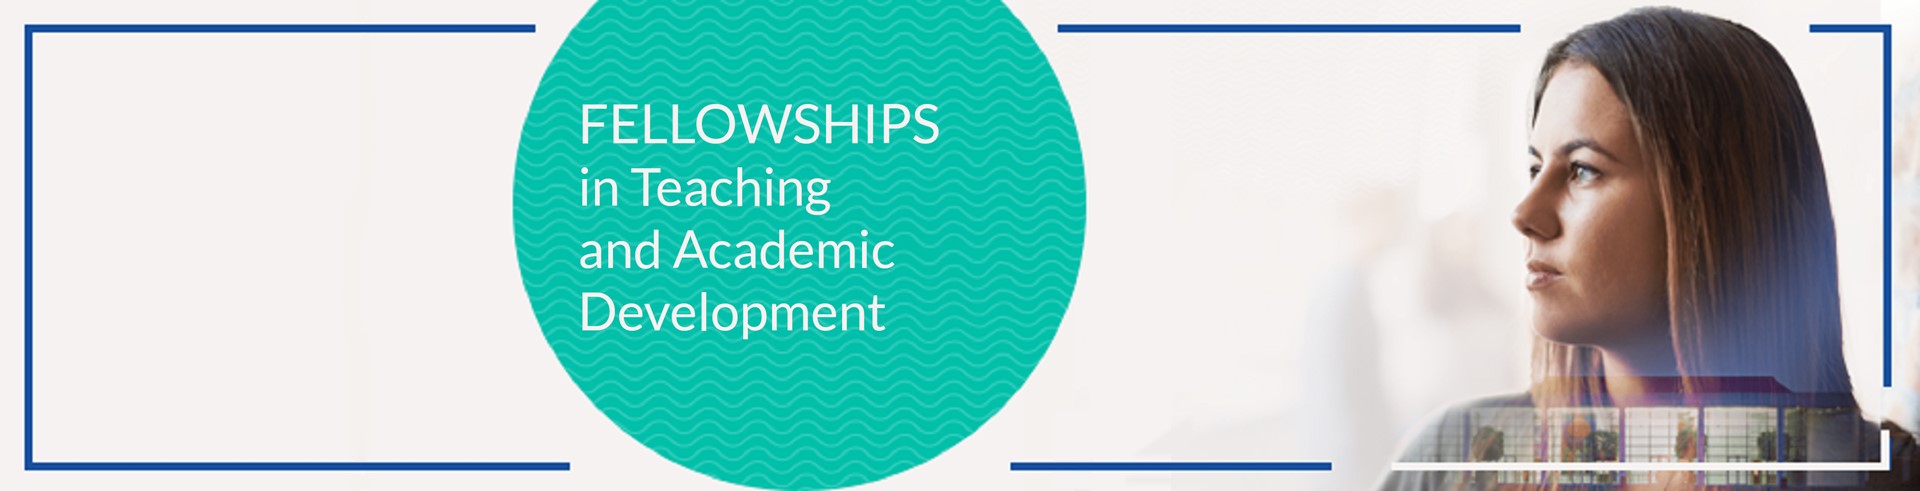 Fellows in Teaching & Academic Development appointed